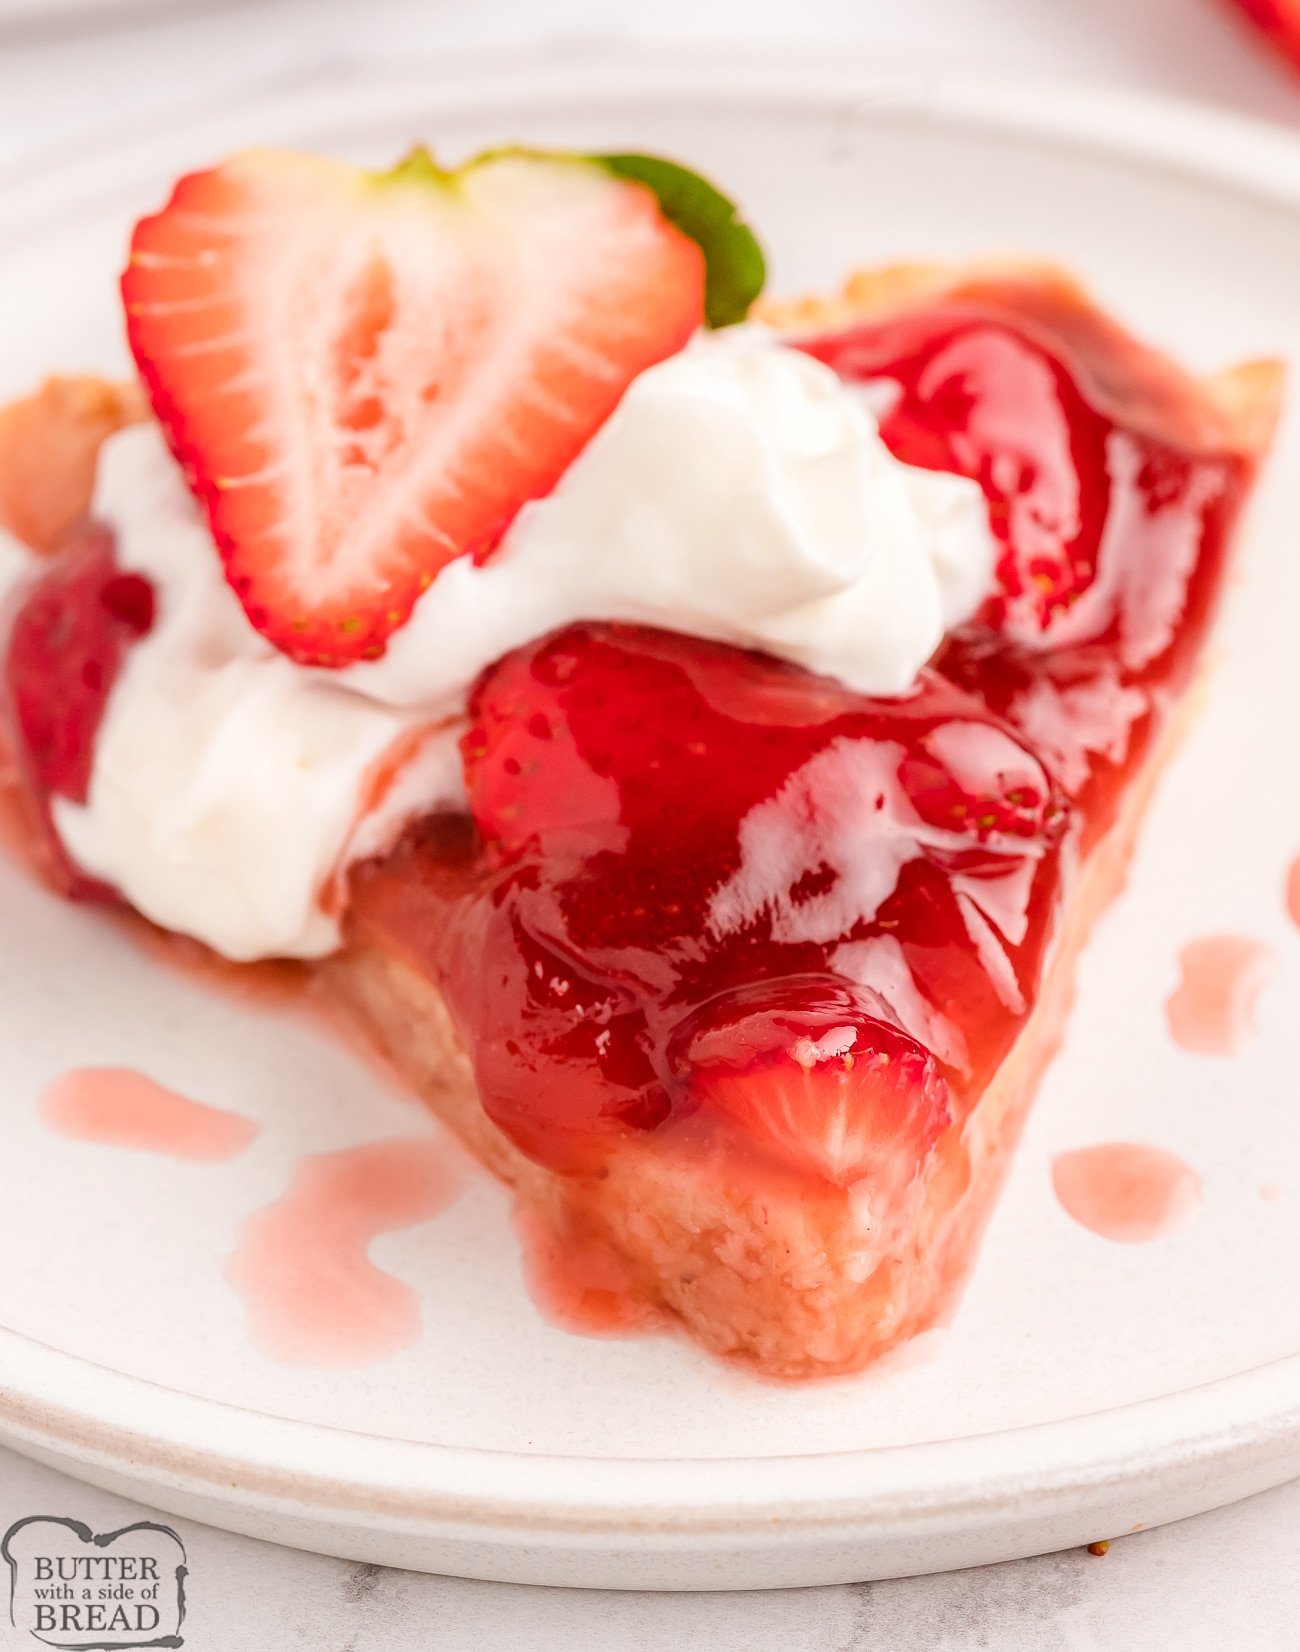 slice of strawberry tart with whipped cream